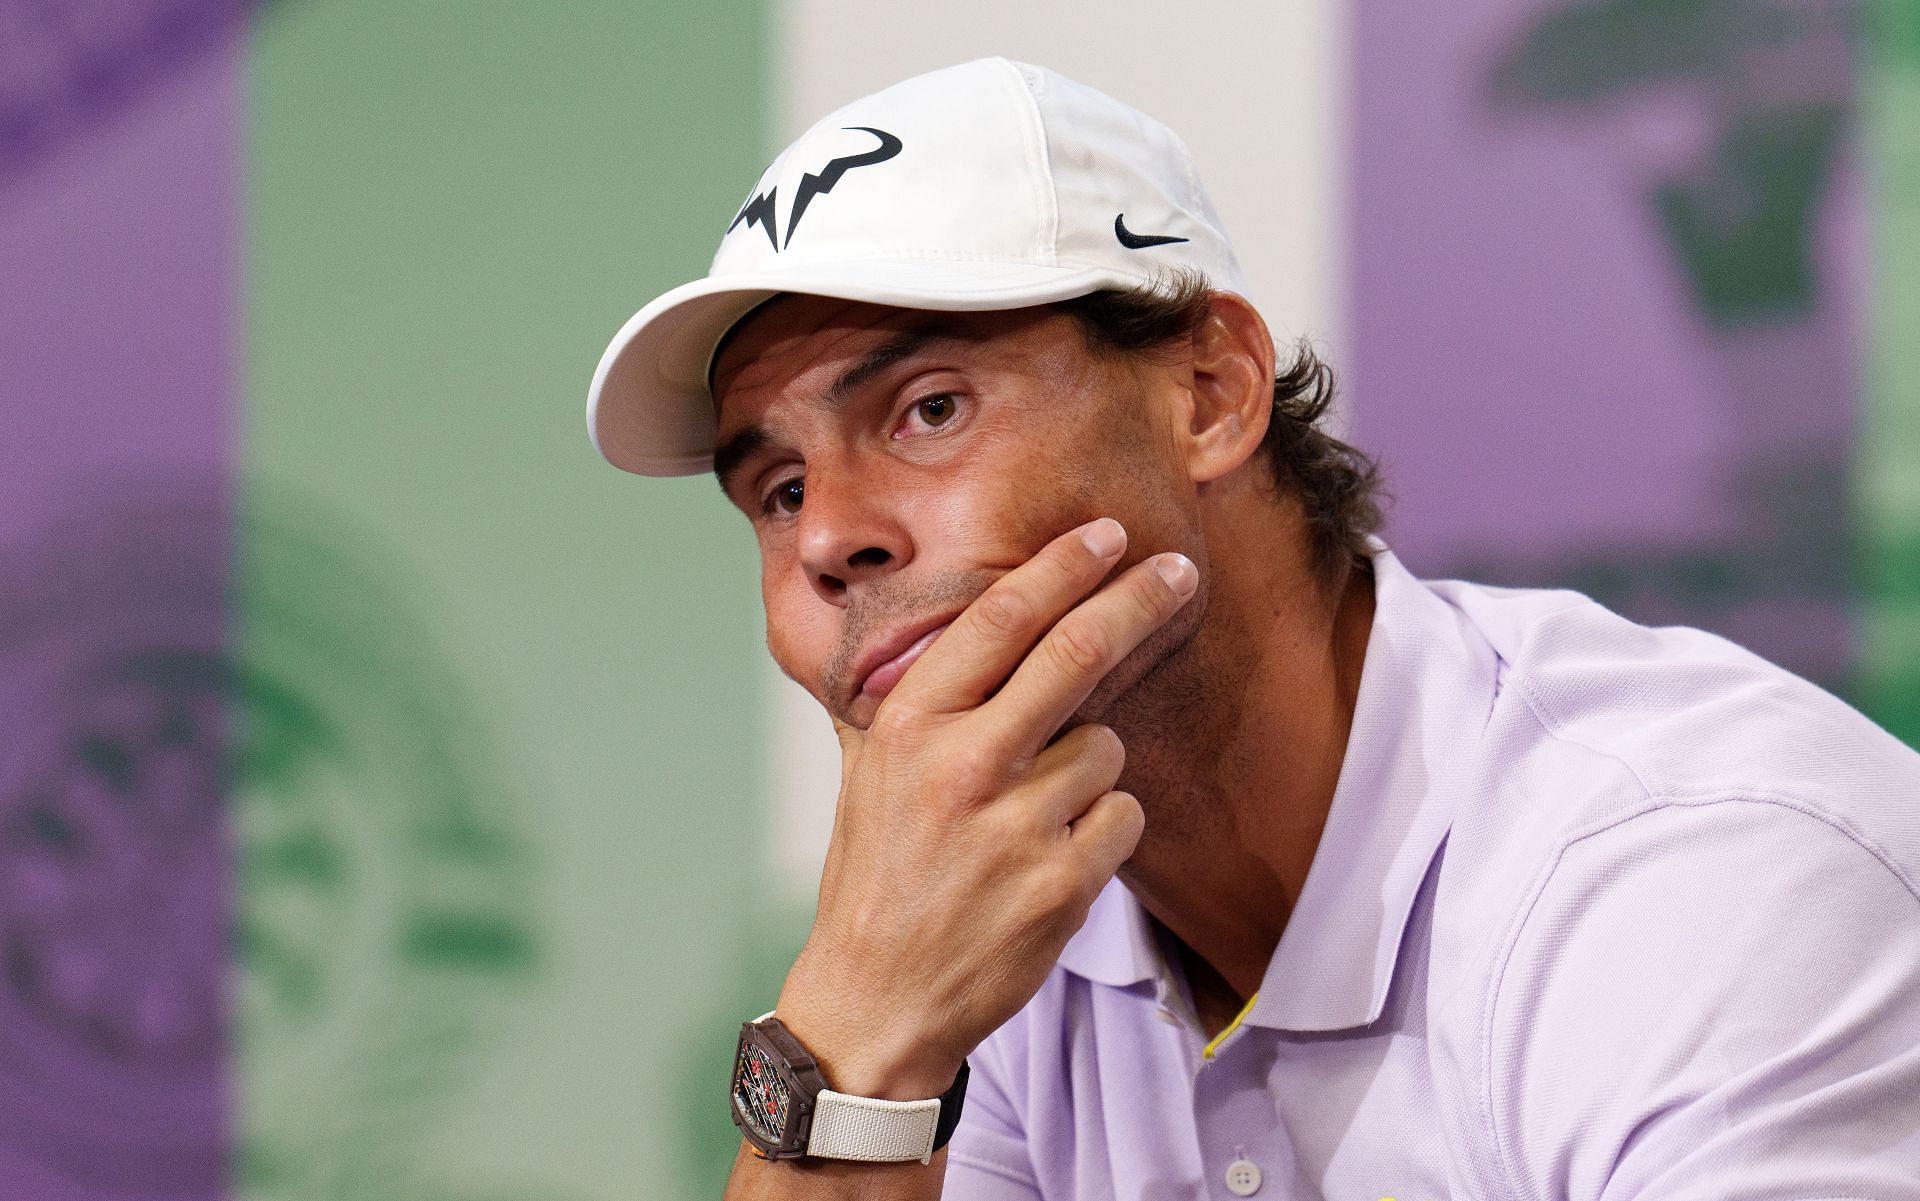 Rafael Nadal pictured during a press conference at the 2022 Wimbledon Championships.